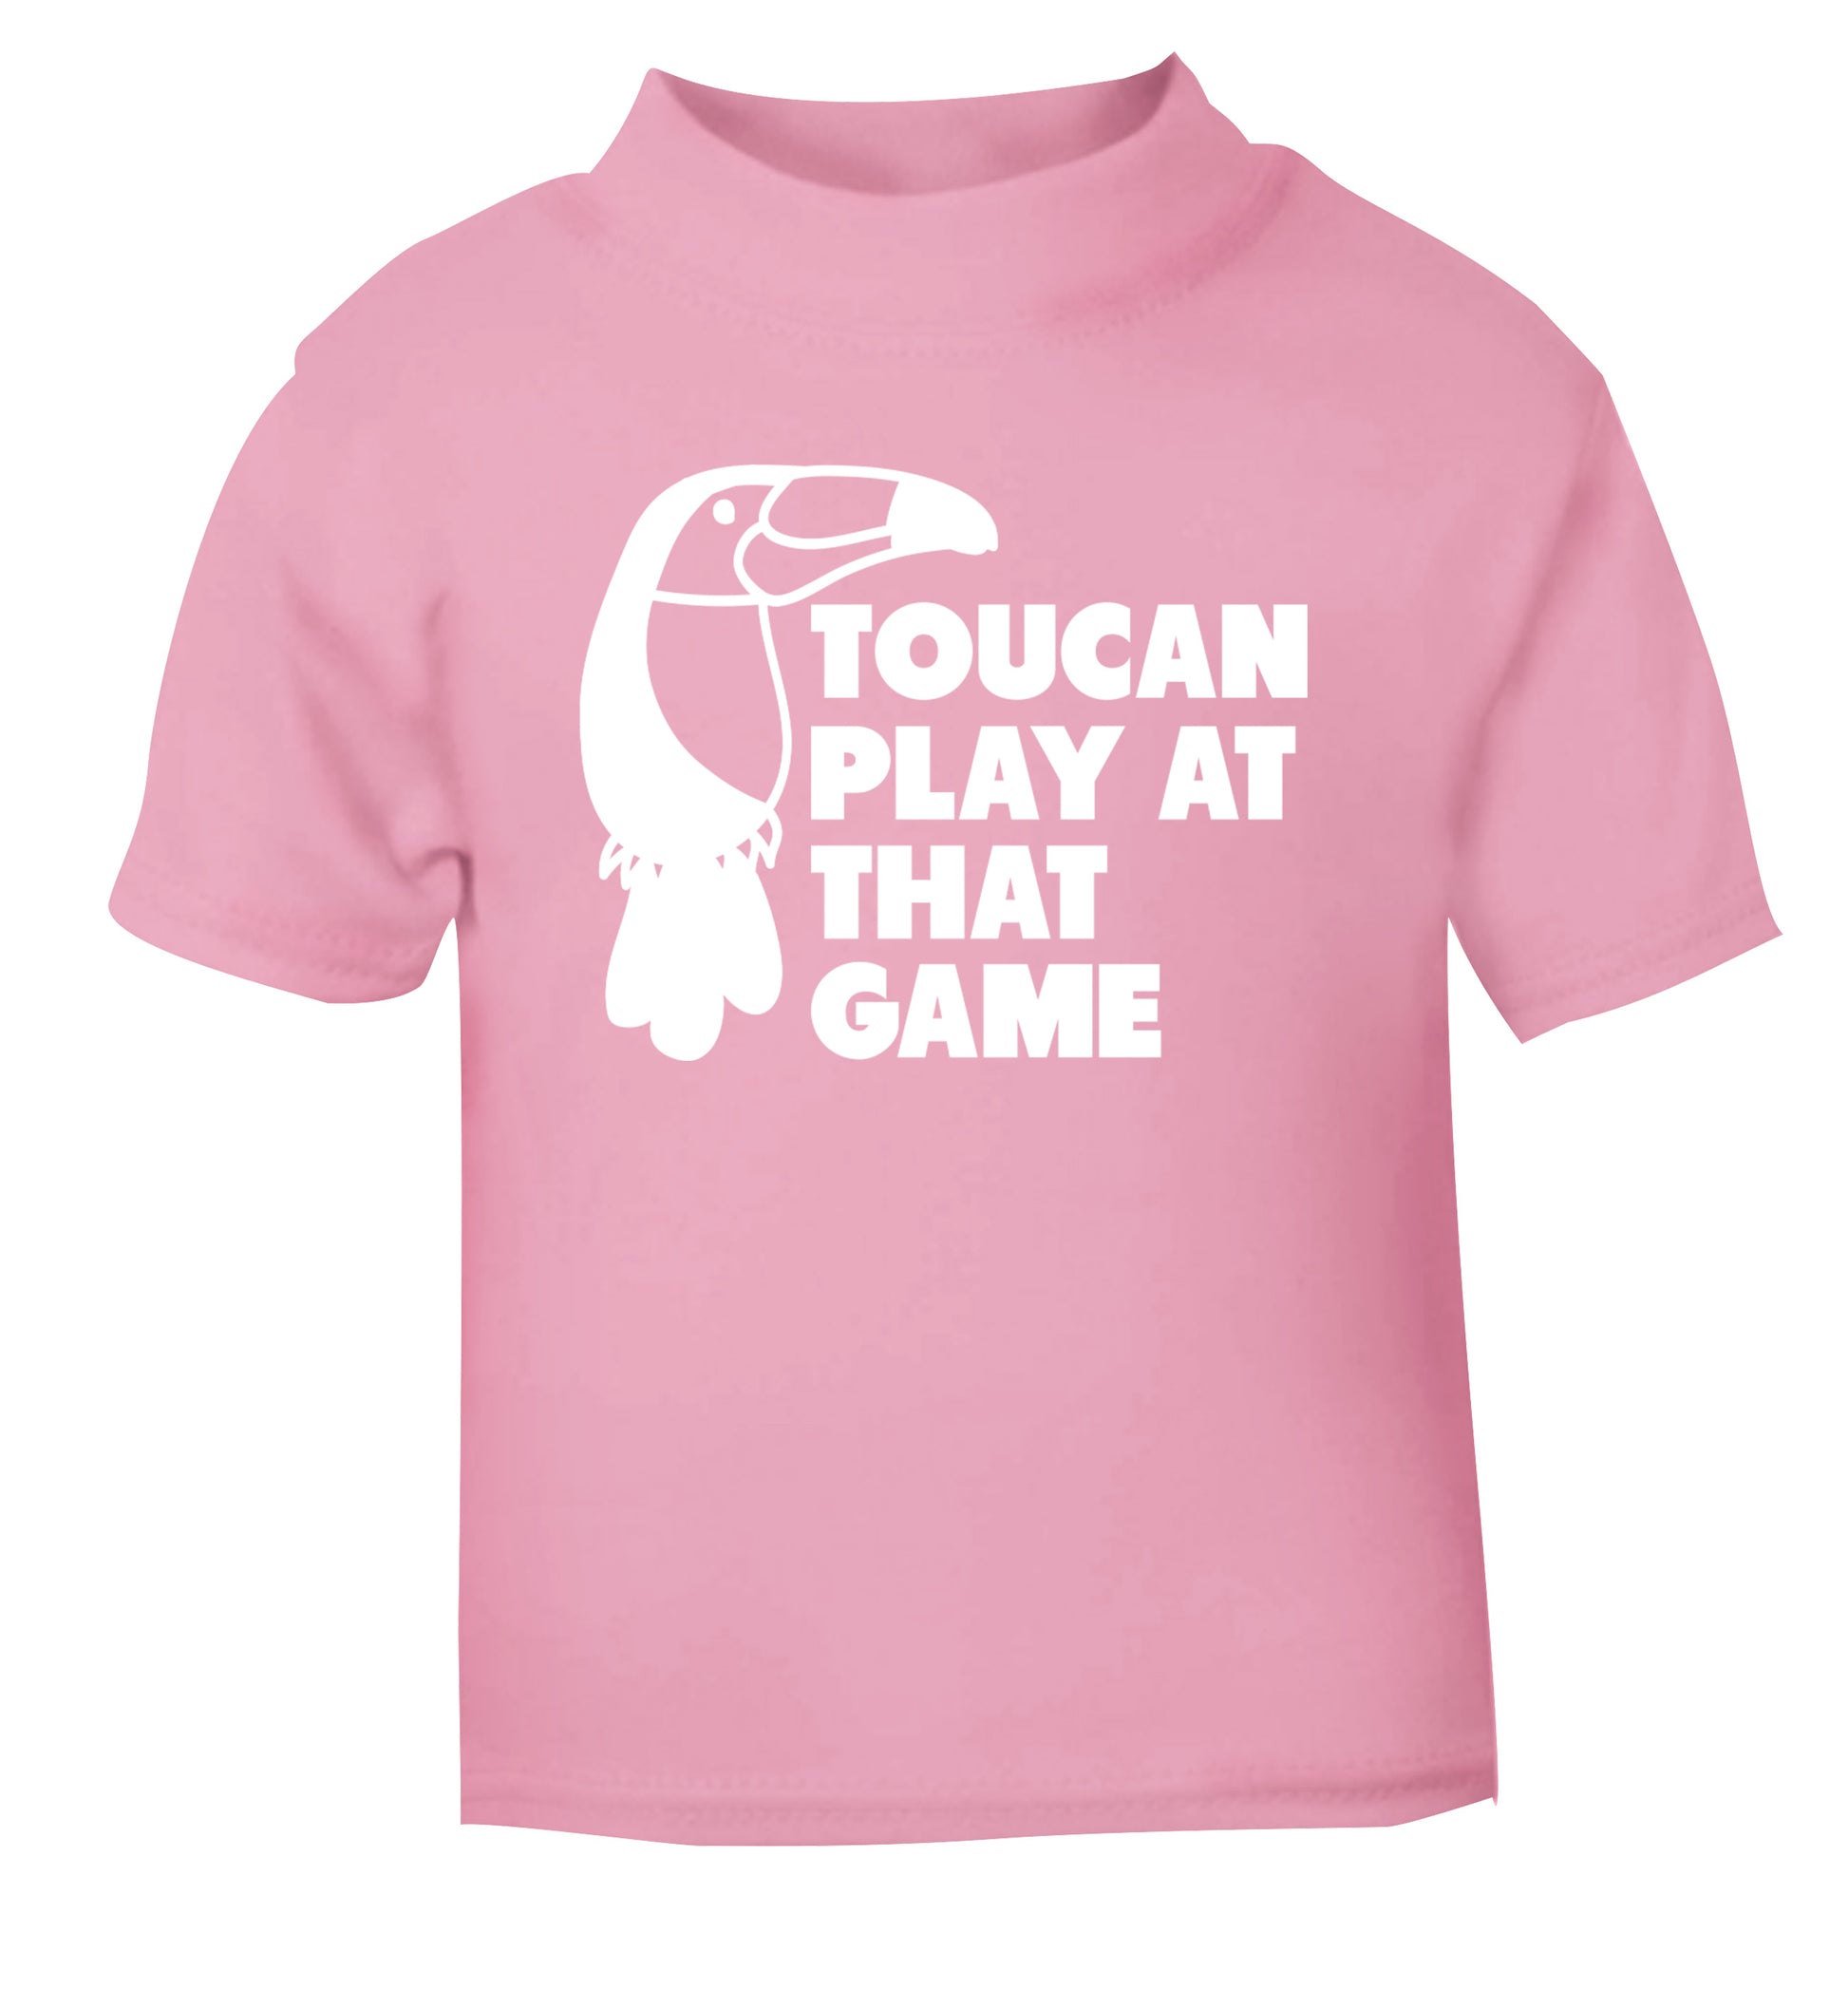 Toucan play at that game light pink Baby Toddler Tshirt 2 Years